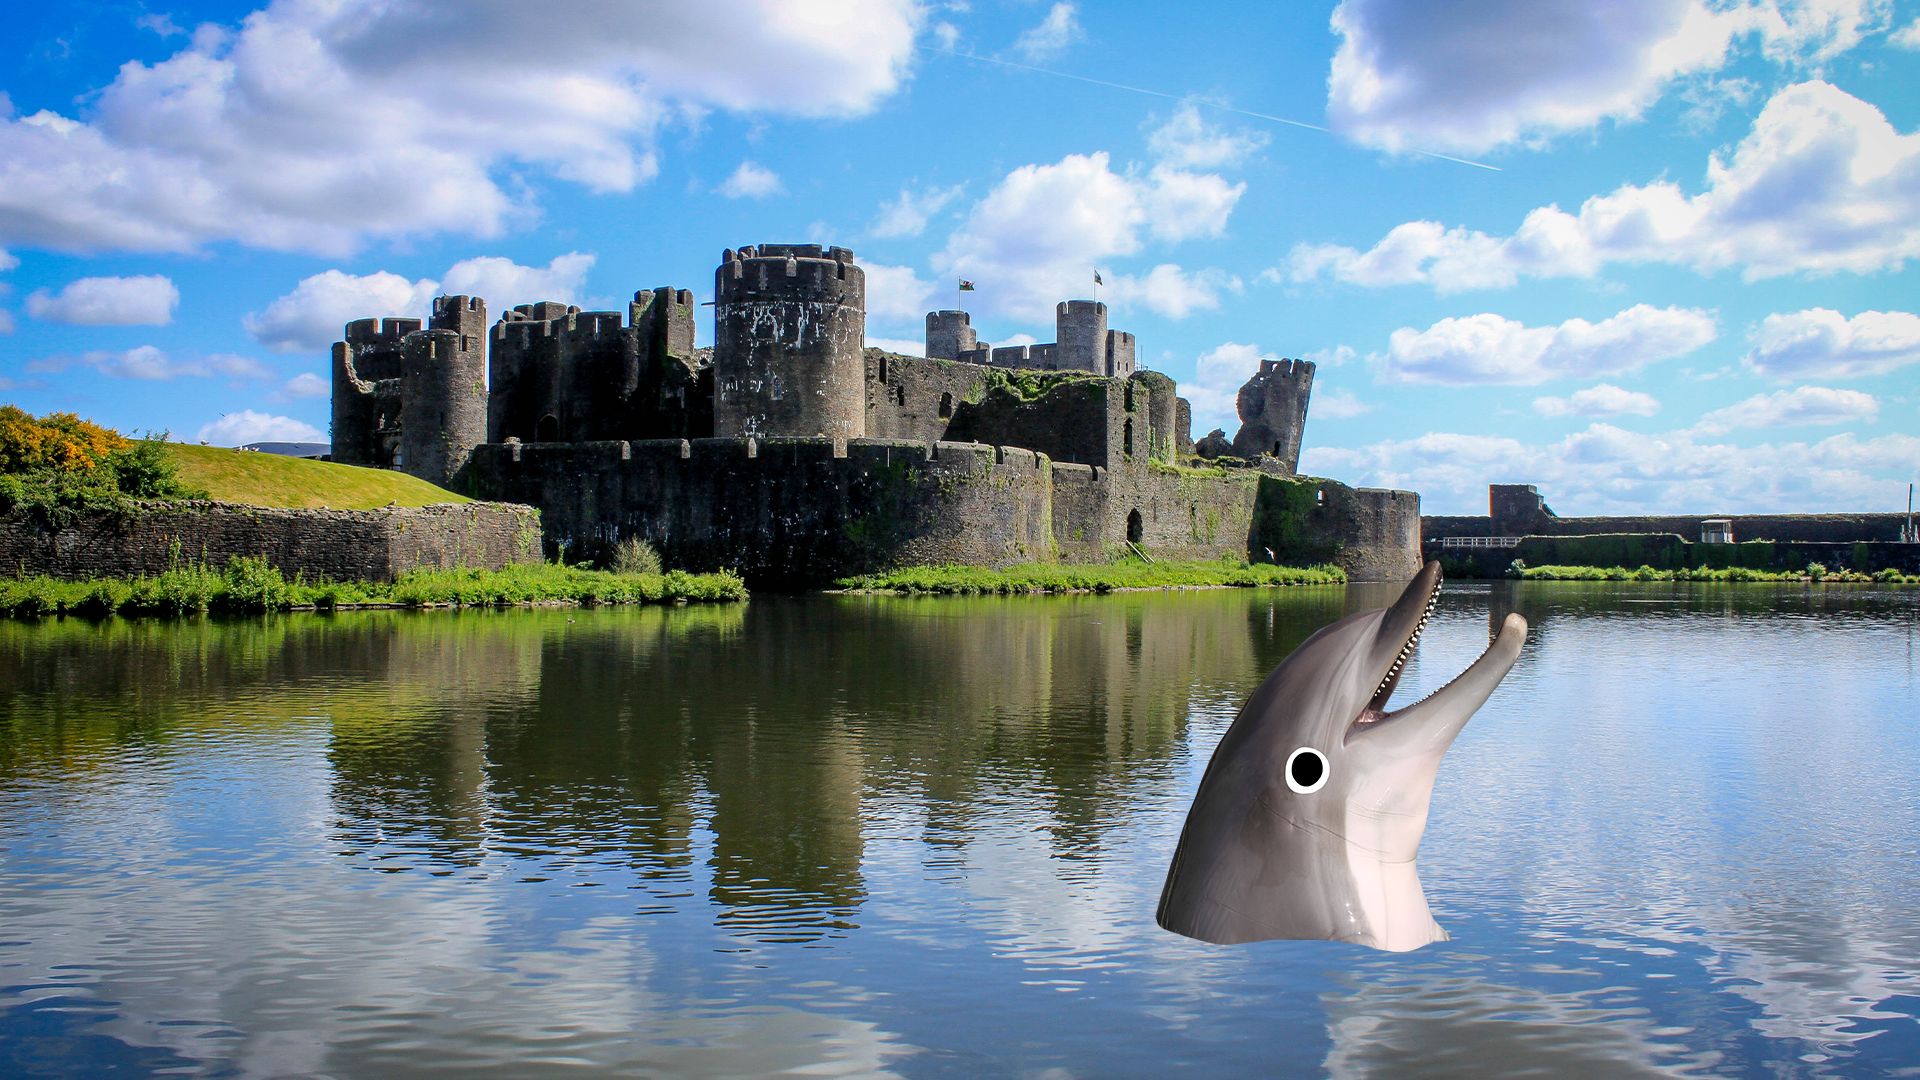 A Welsh castle and a Beano dolphin popping out of the moat